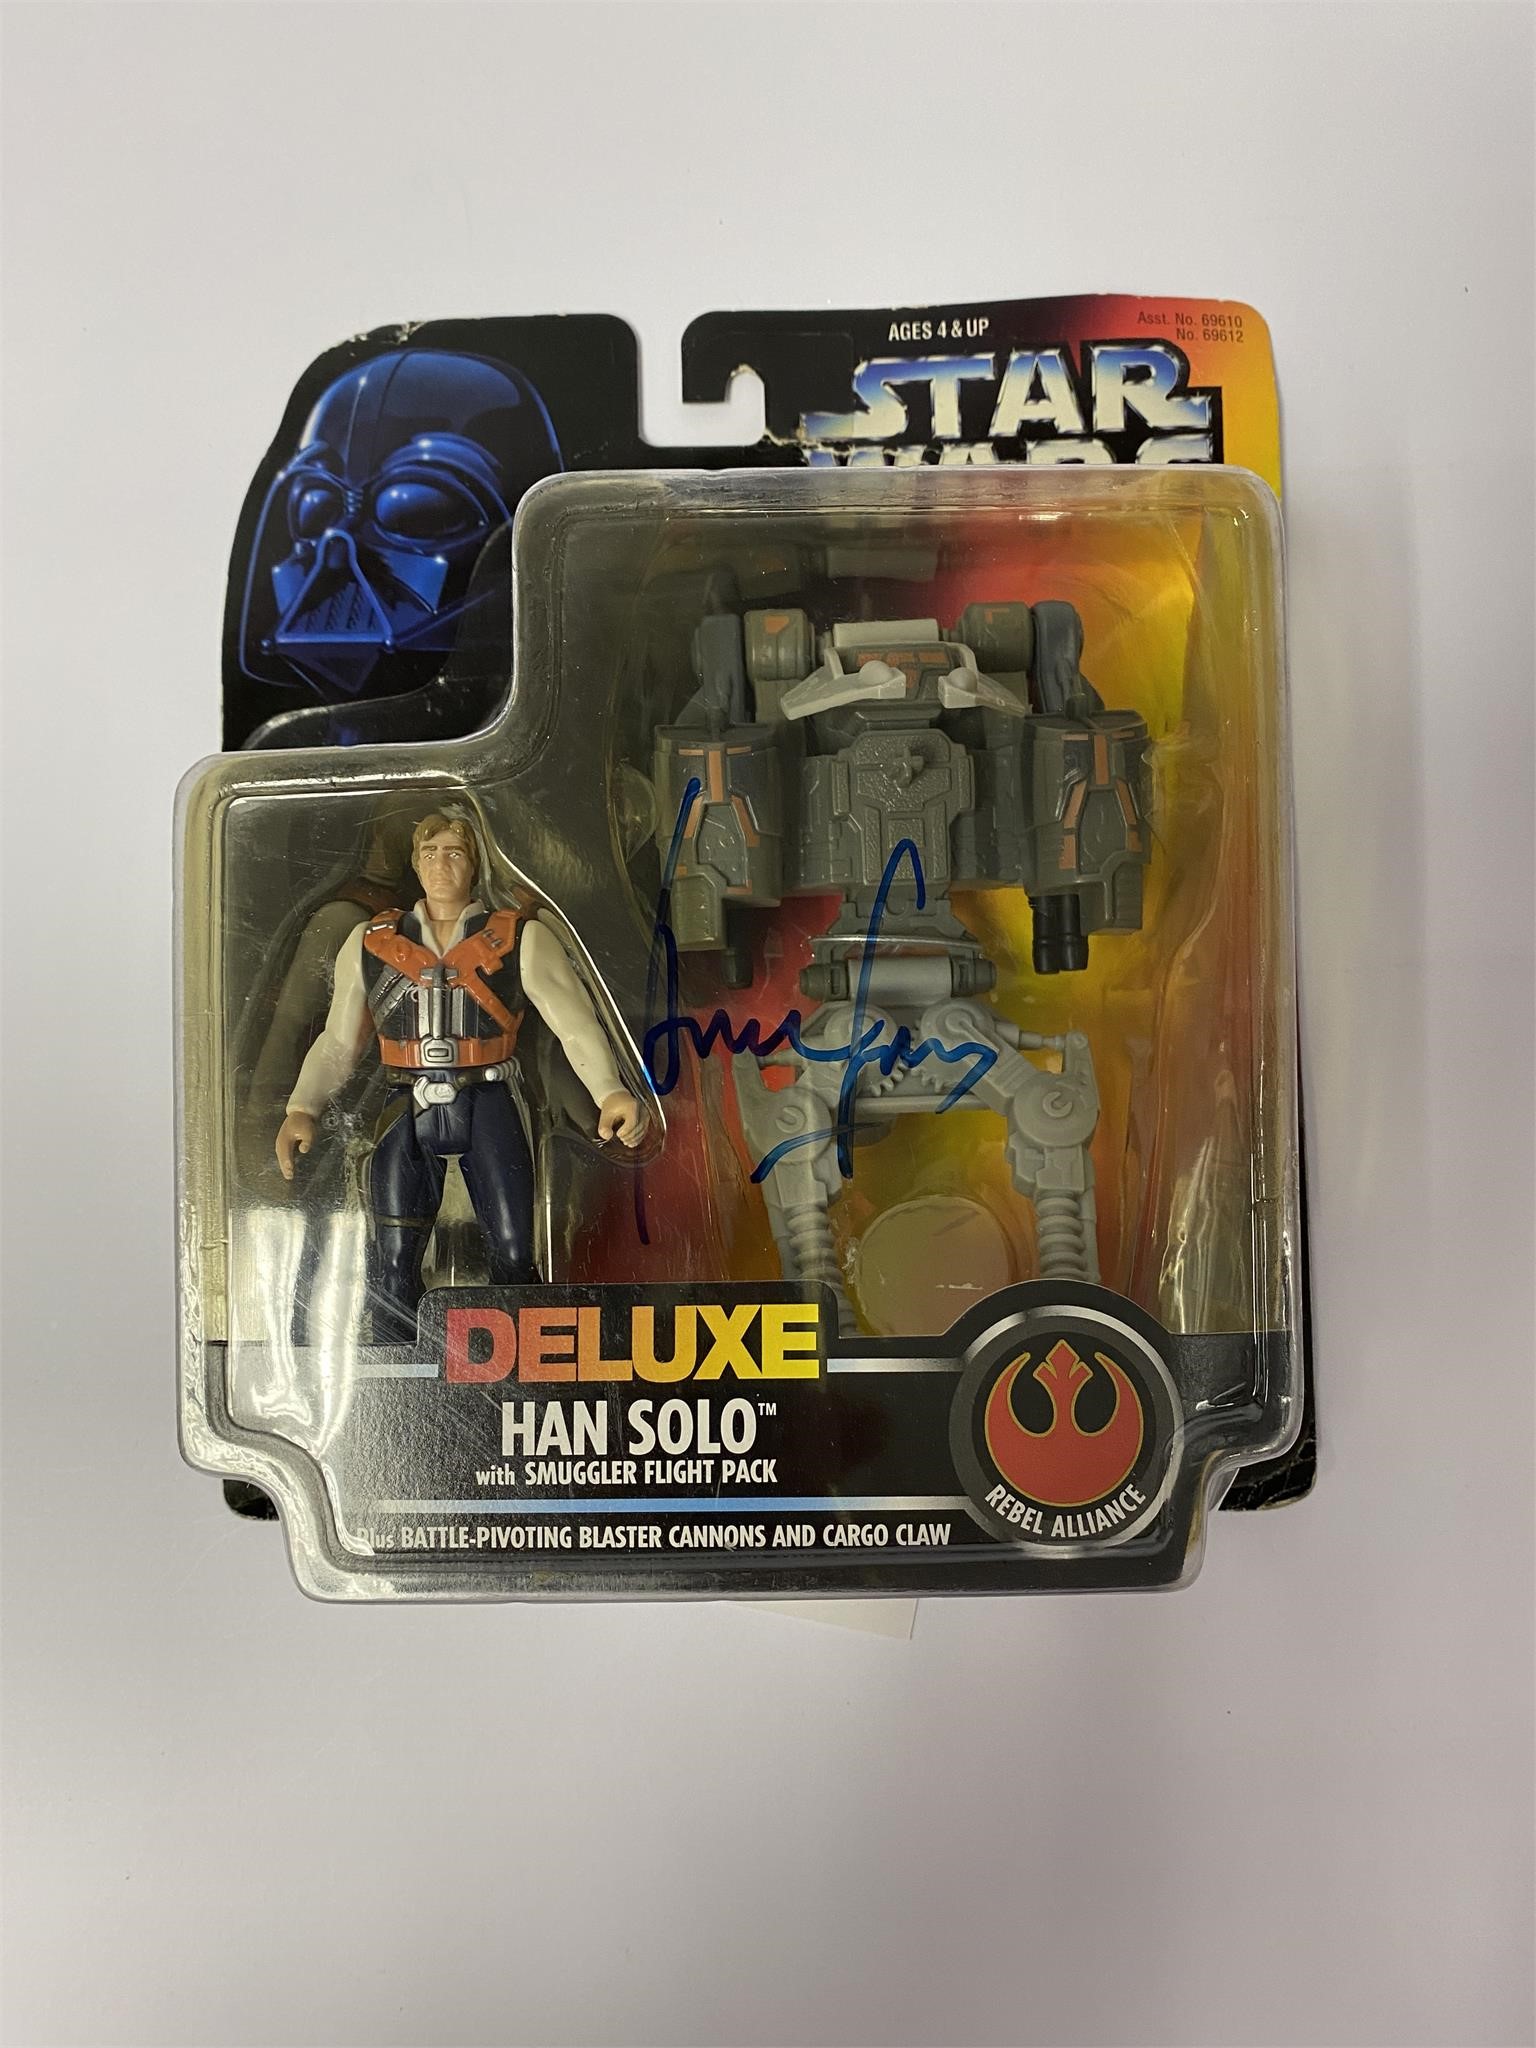 Autograph Star Wars Toy